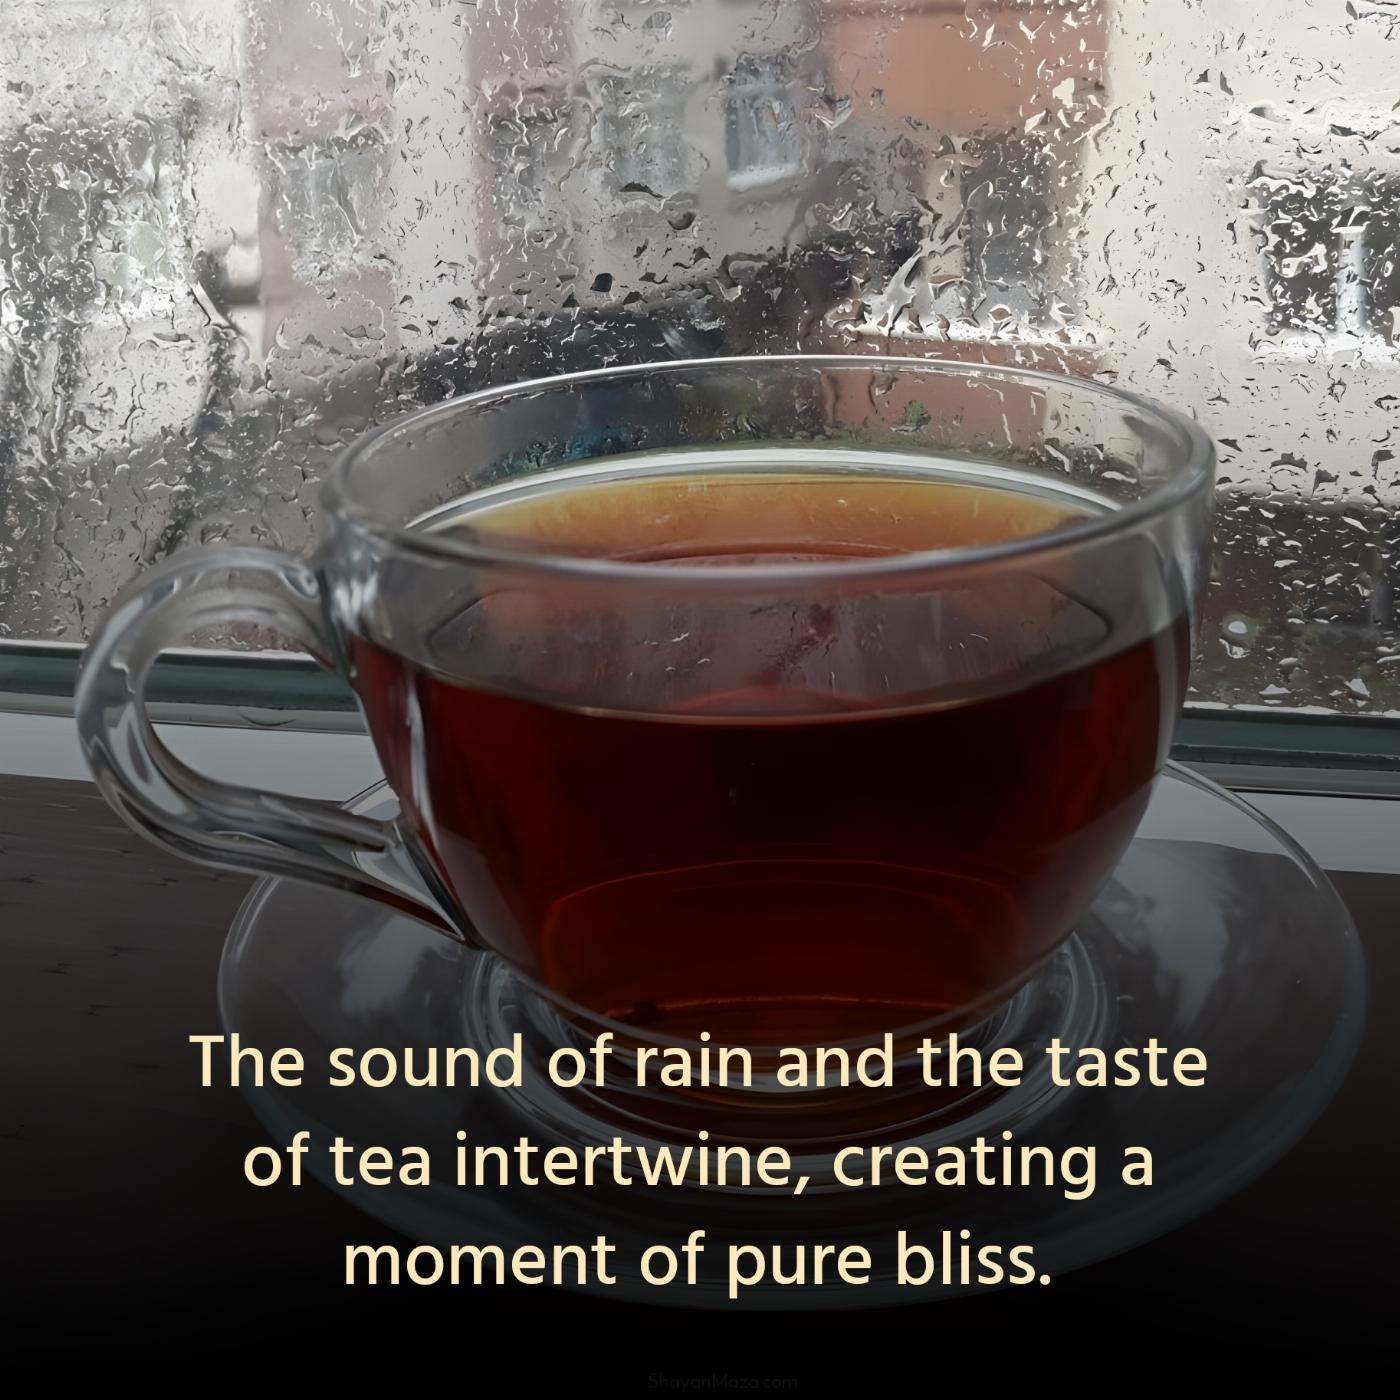 The sound of rain and the taste of tea intertwine